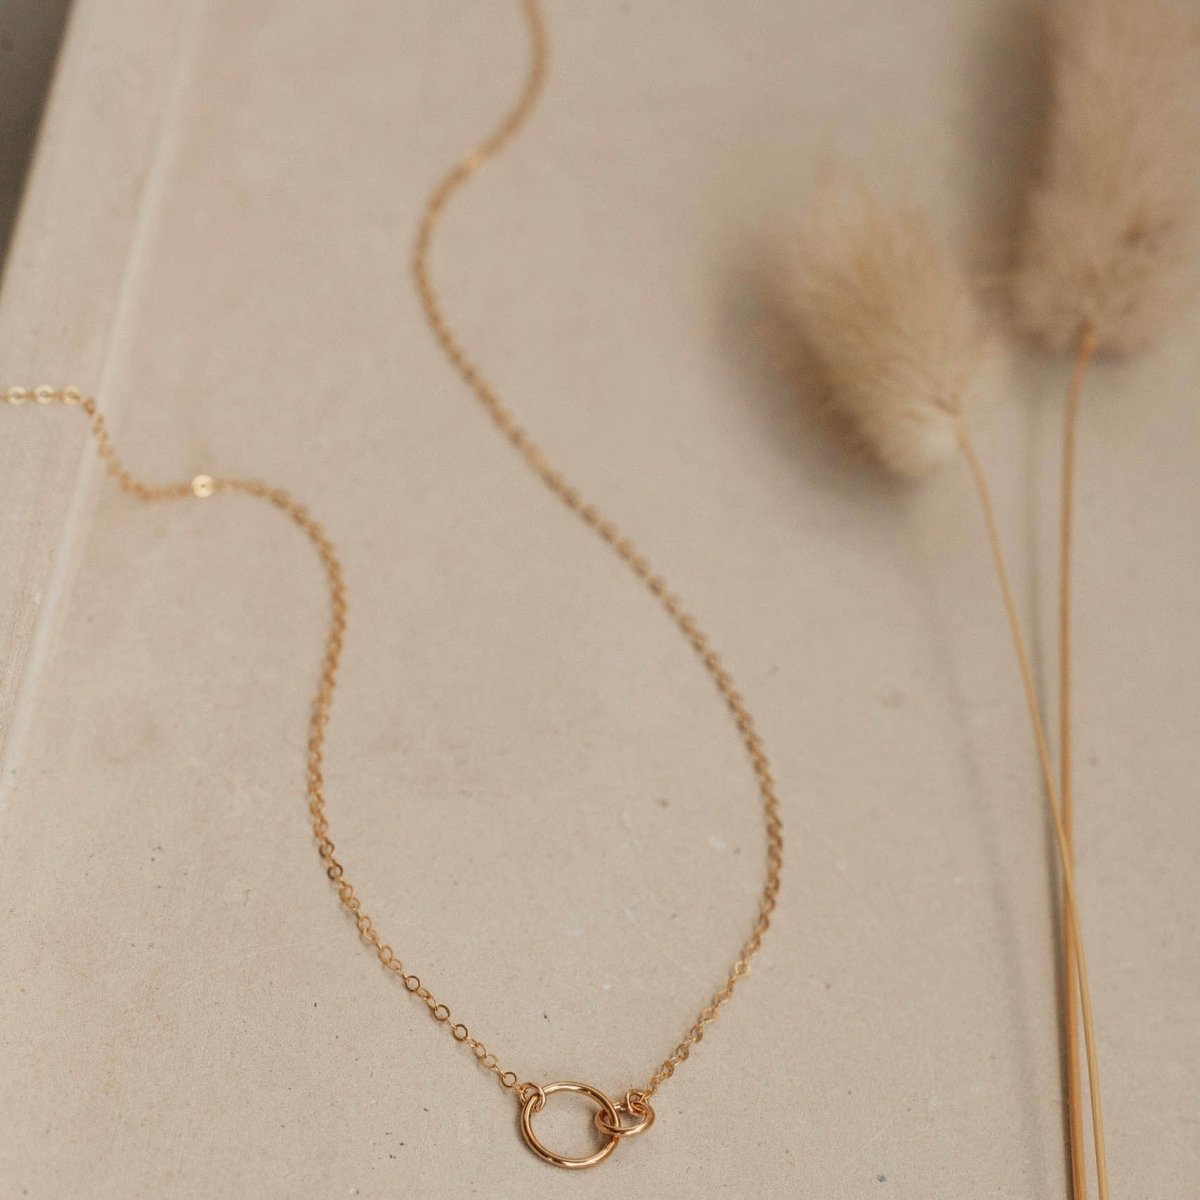 A dainty gold tone chain necklace connected with two tiny links. The Tiny Links Necklace is handcrafted by Hello Adorn in Eau Claire, WI.